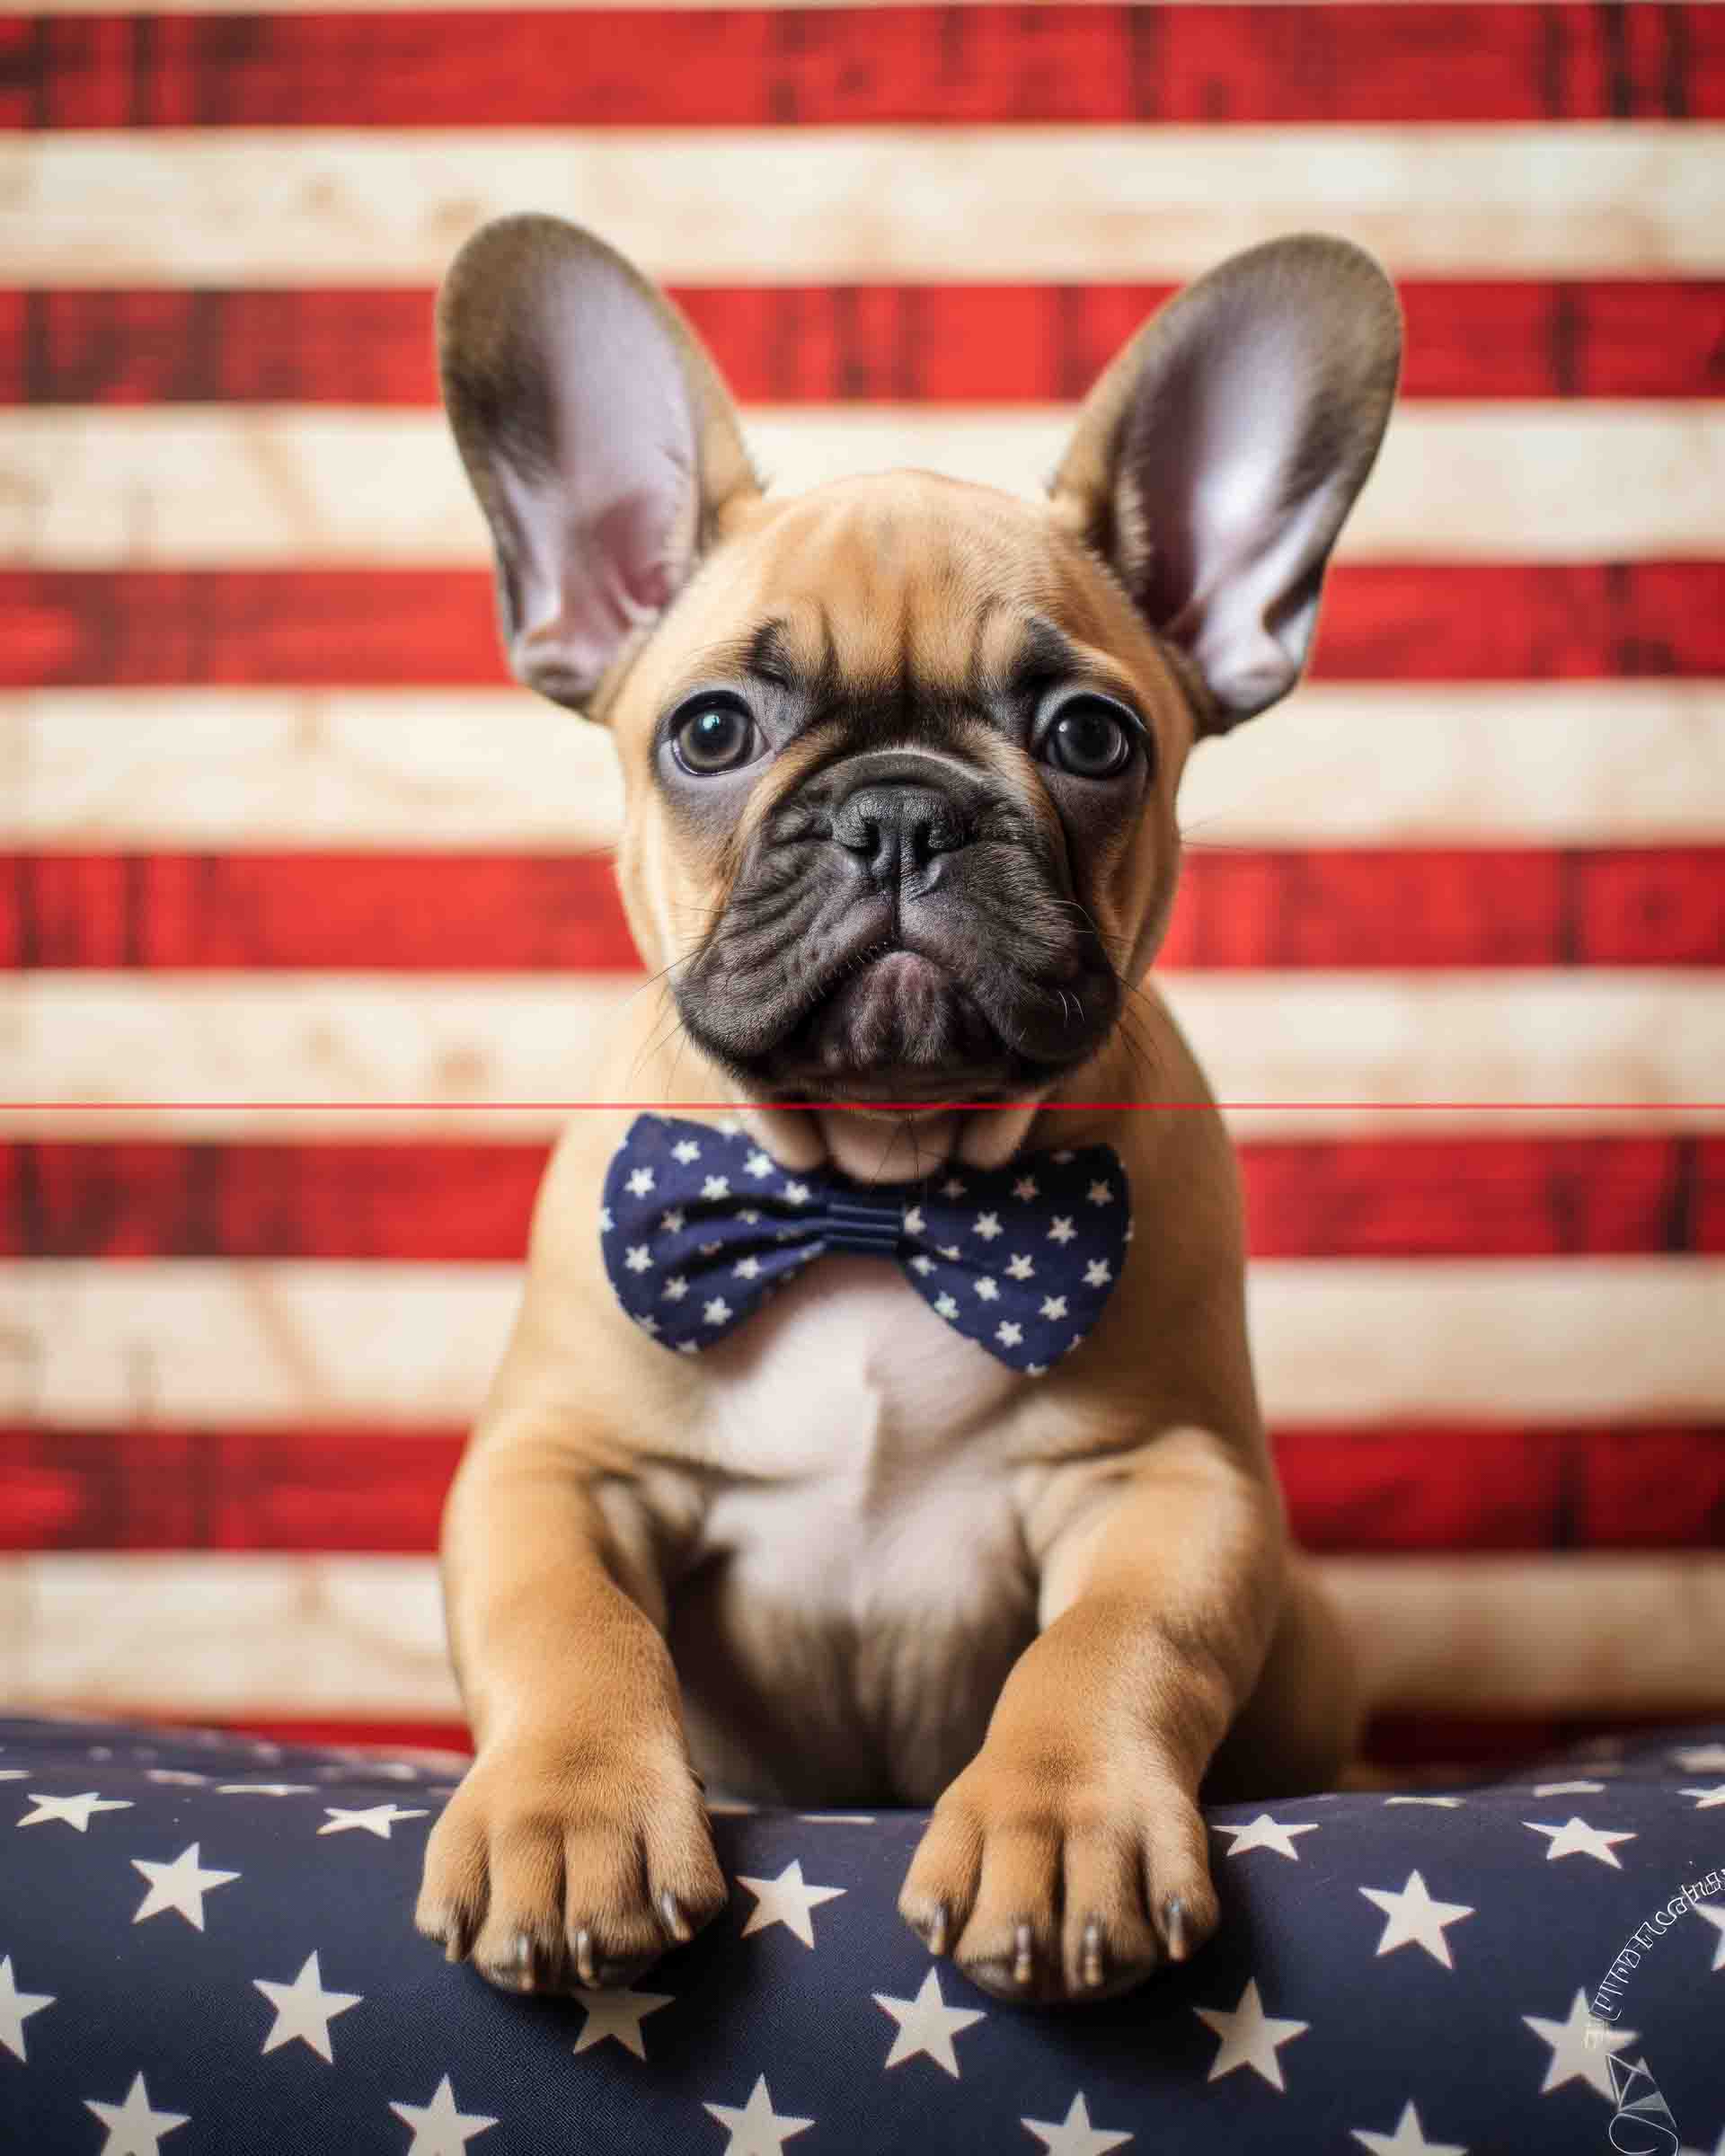 A fawn french bulldog puppy sits in front of an american flag, looking directly at the viewer with an attentive expression, showcasing large bat-like ears and a wrinkled face.